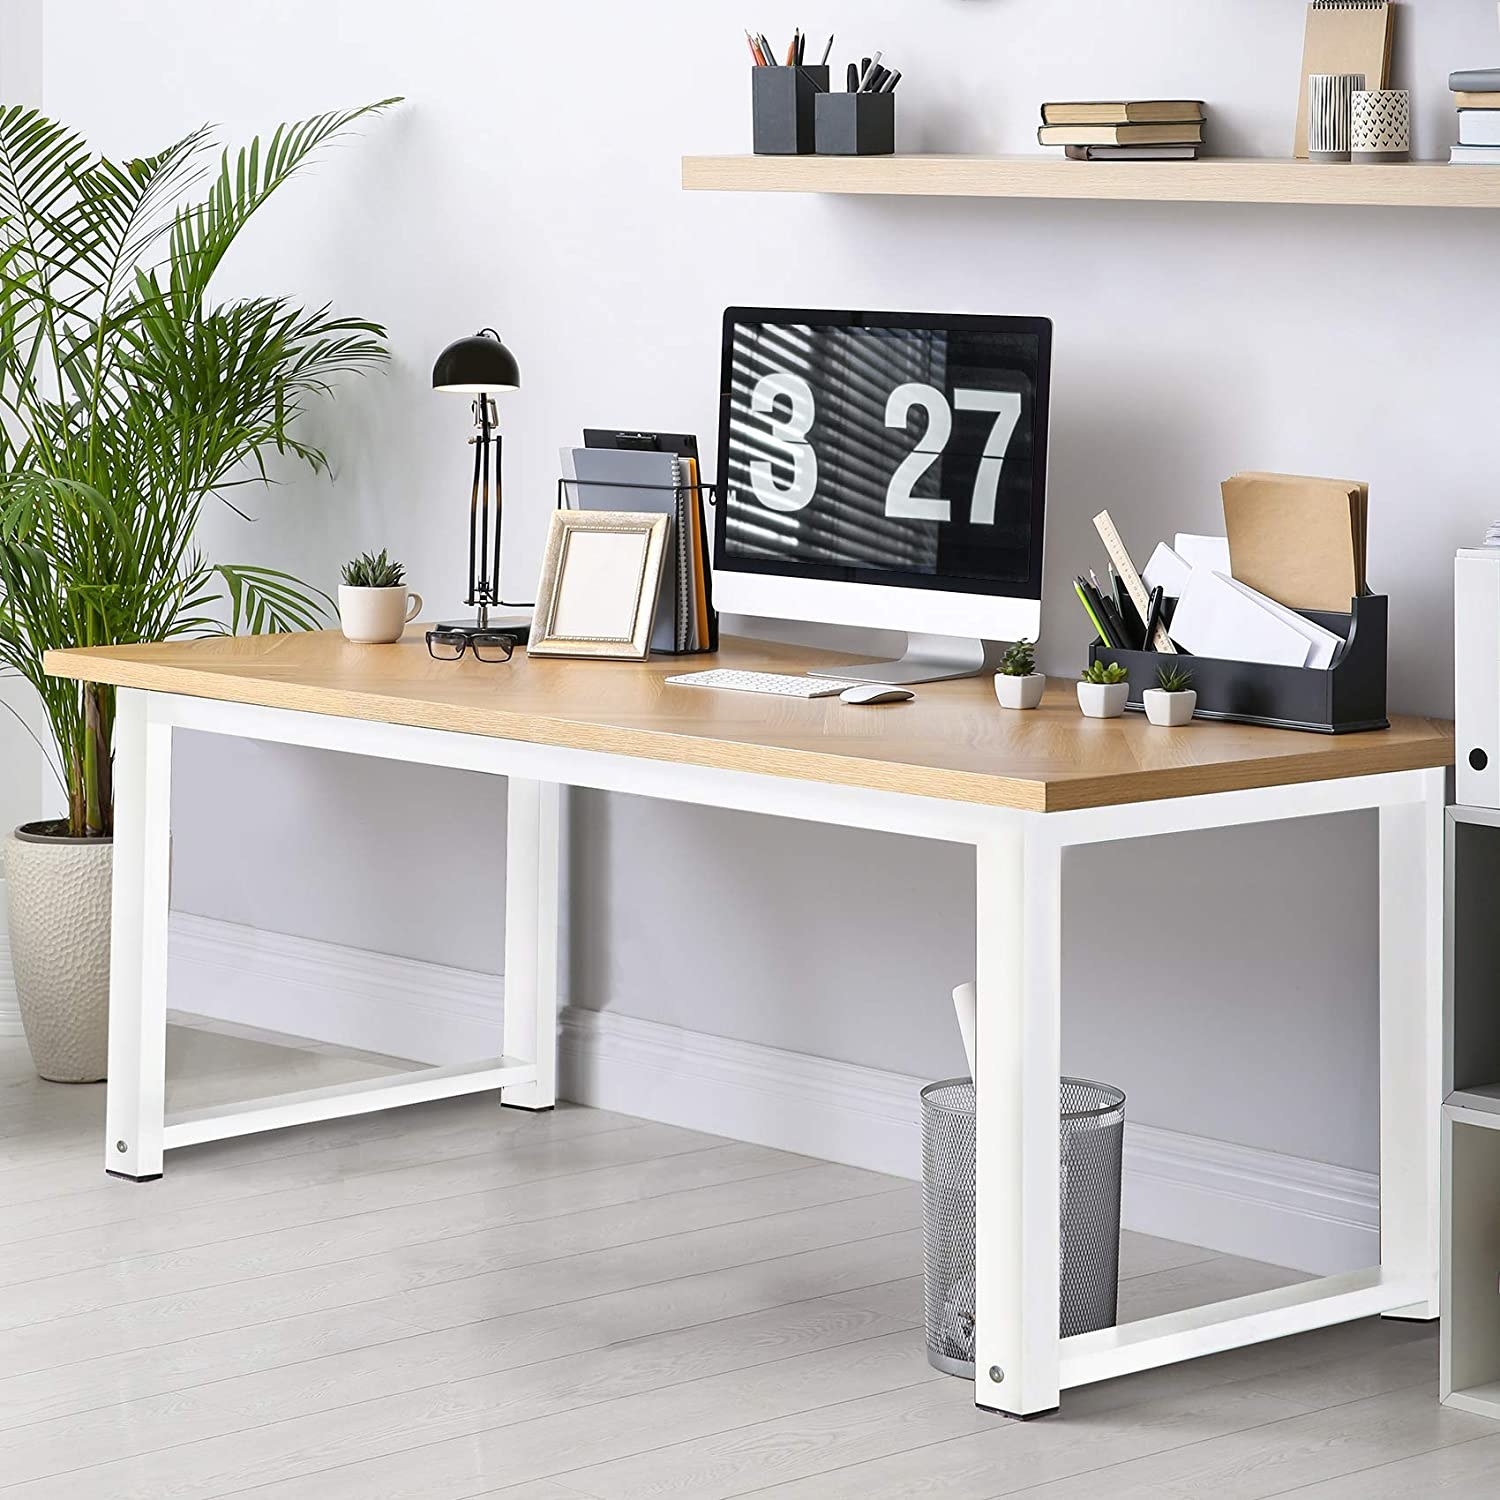 29 Affordable Pieces Of Furniture That Don't Look Like They Belong In A Dorm